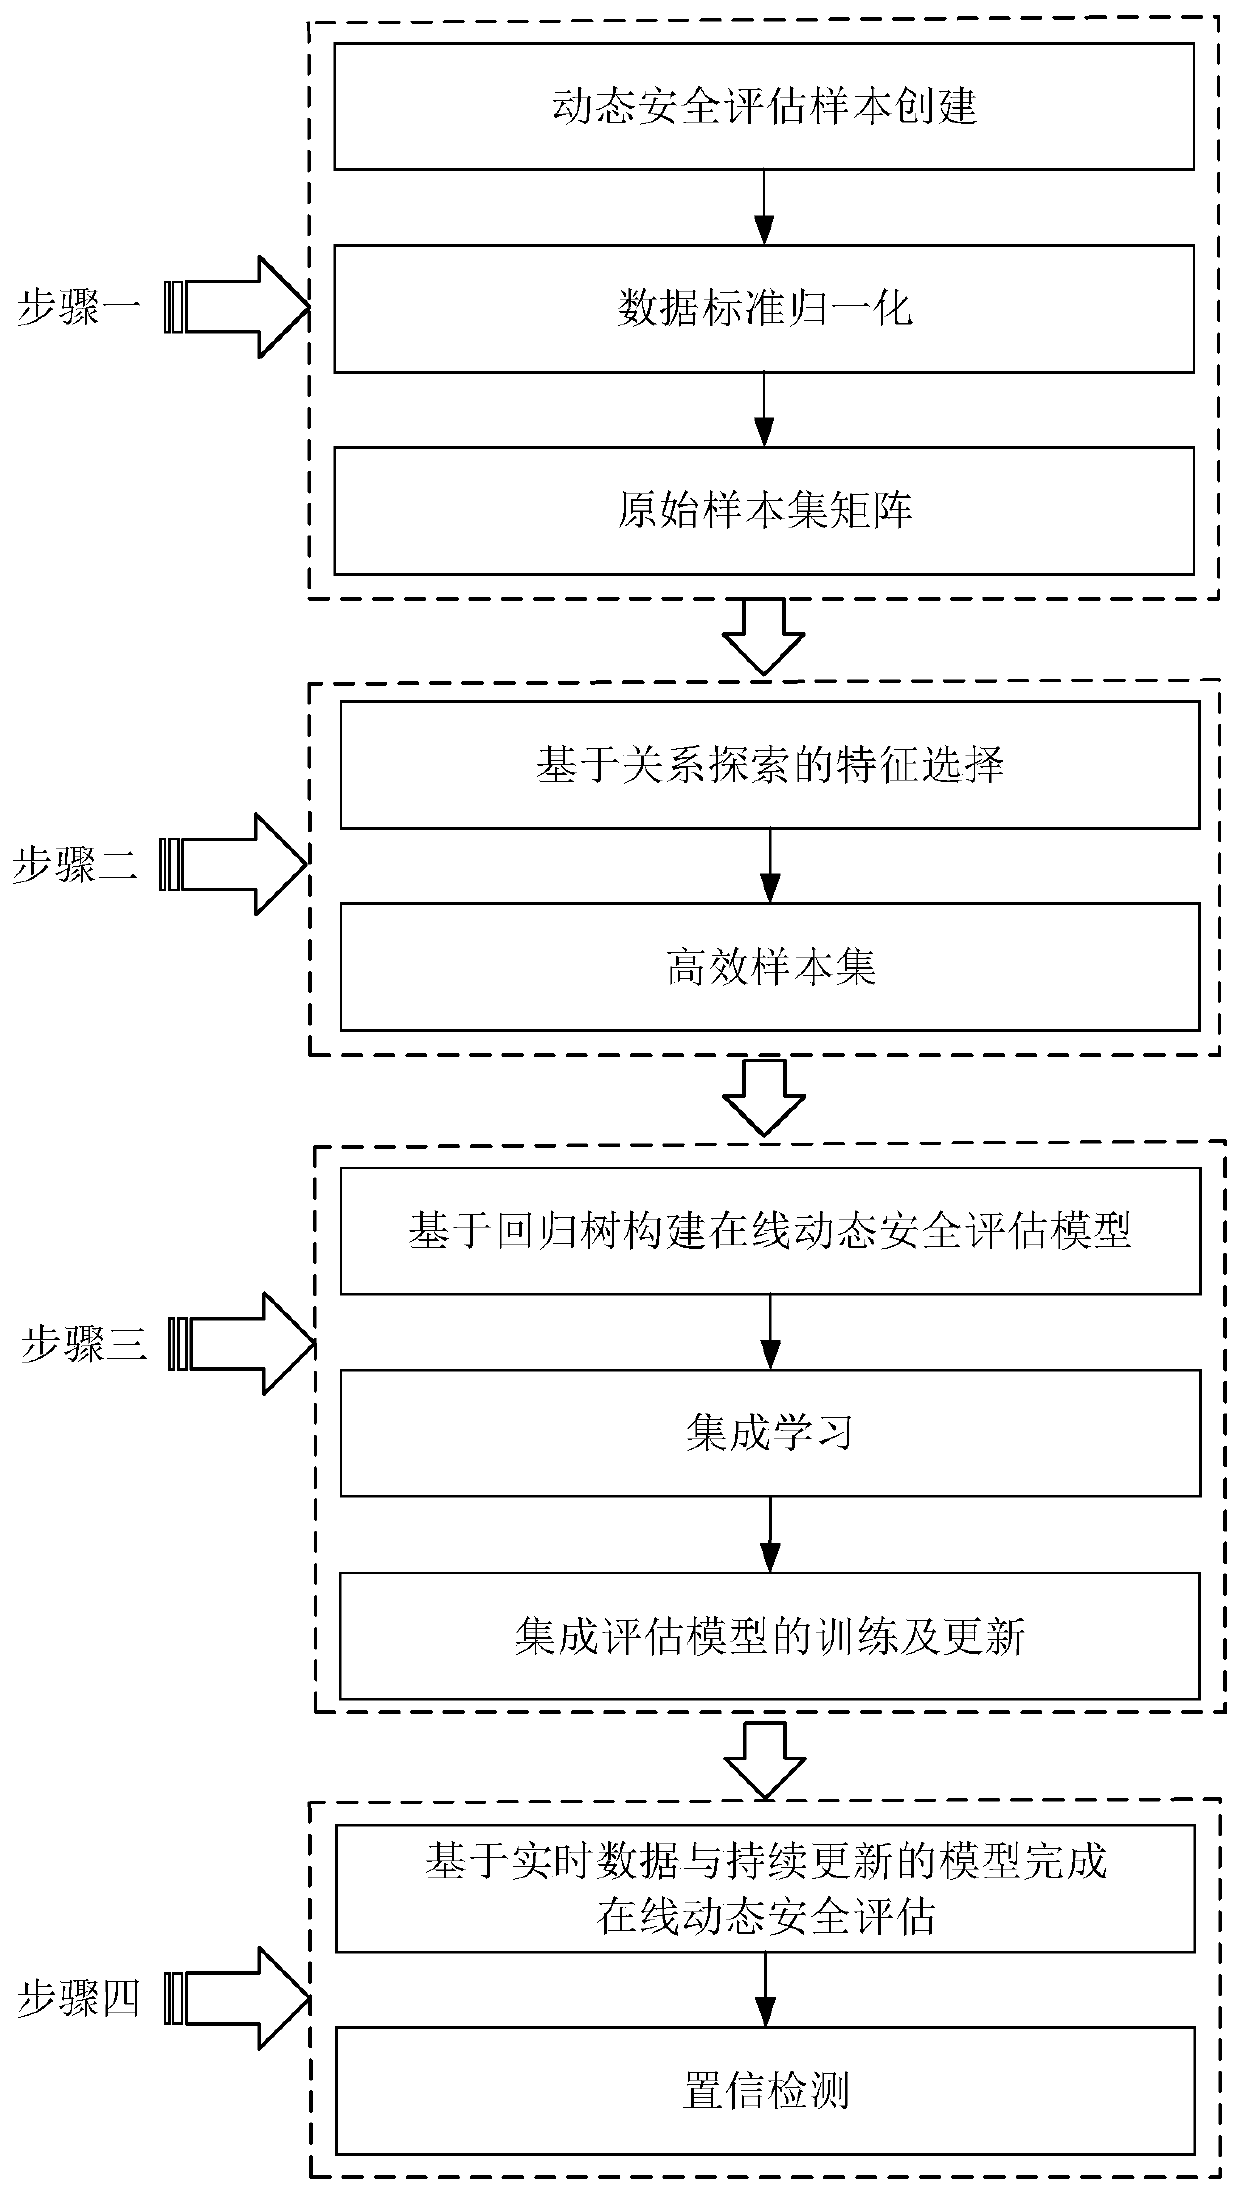 Power system dynamic safety assessment method based on relation exploration and regression tree